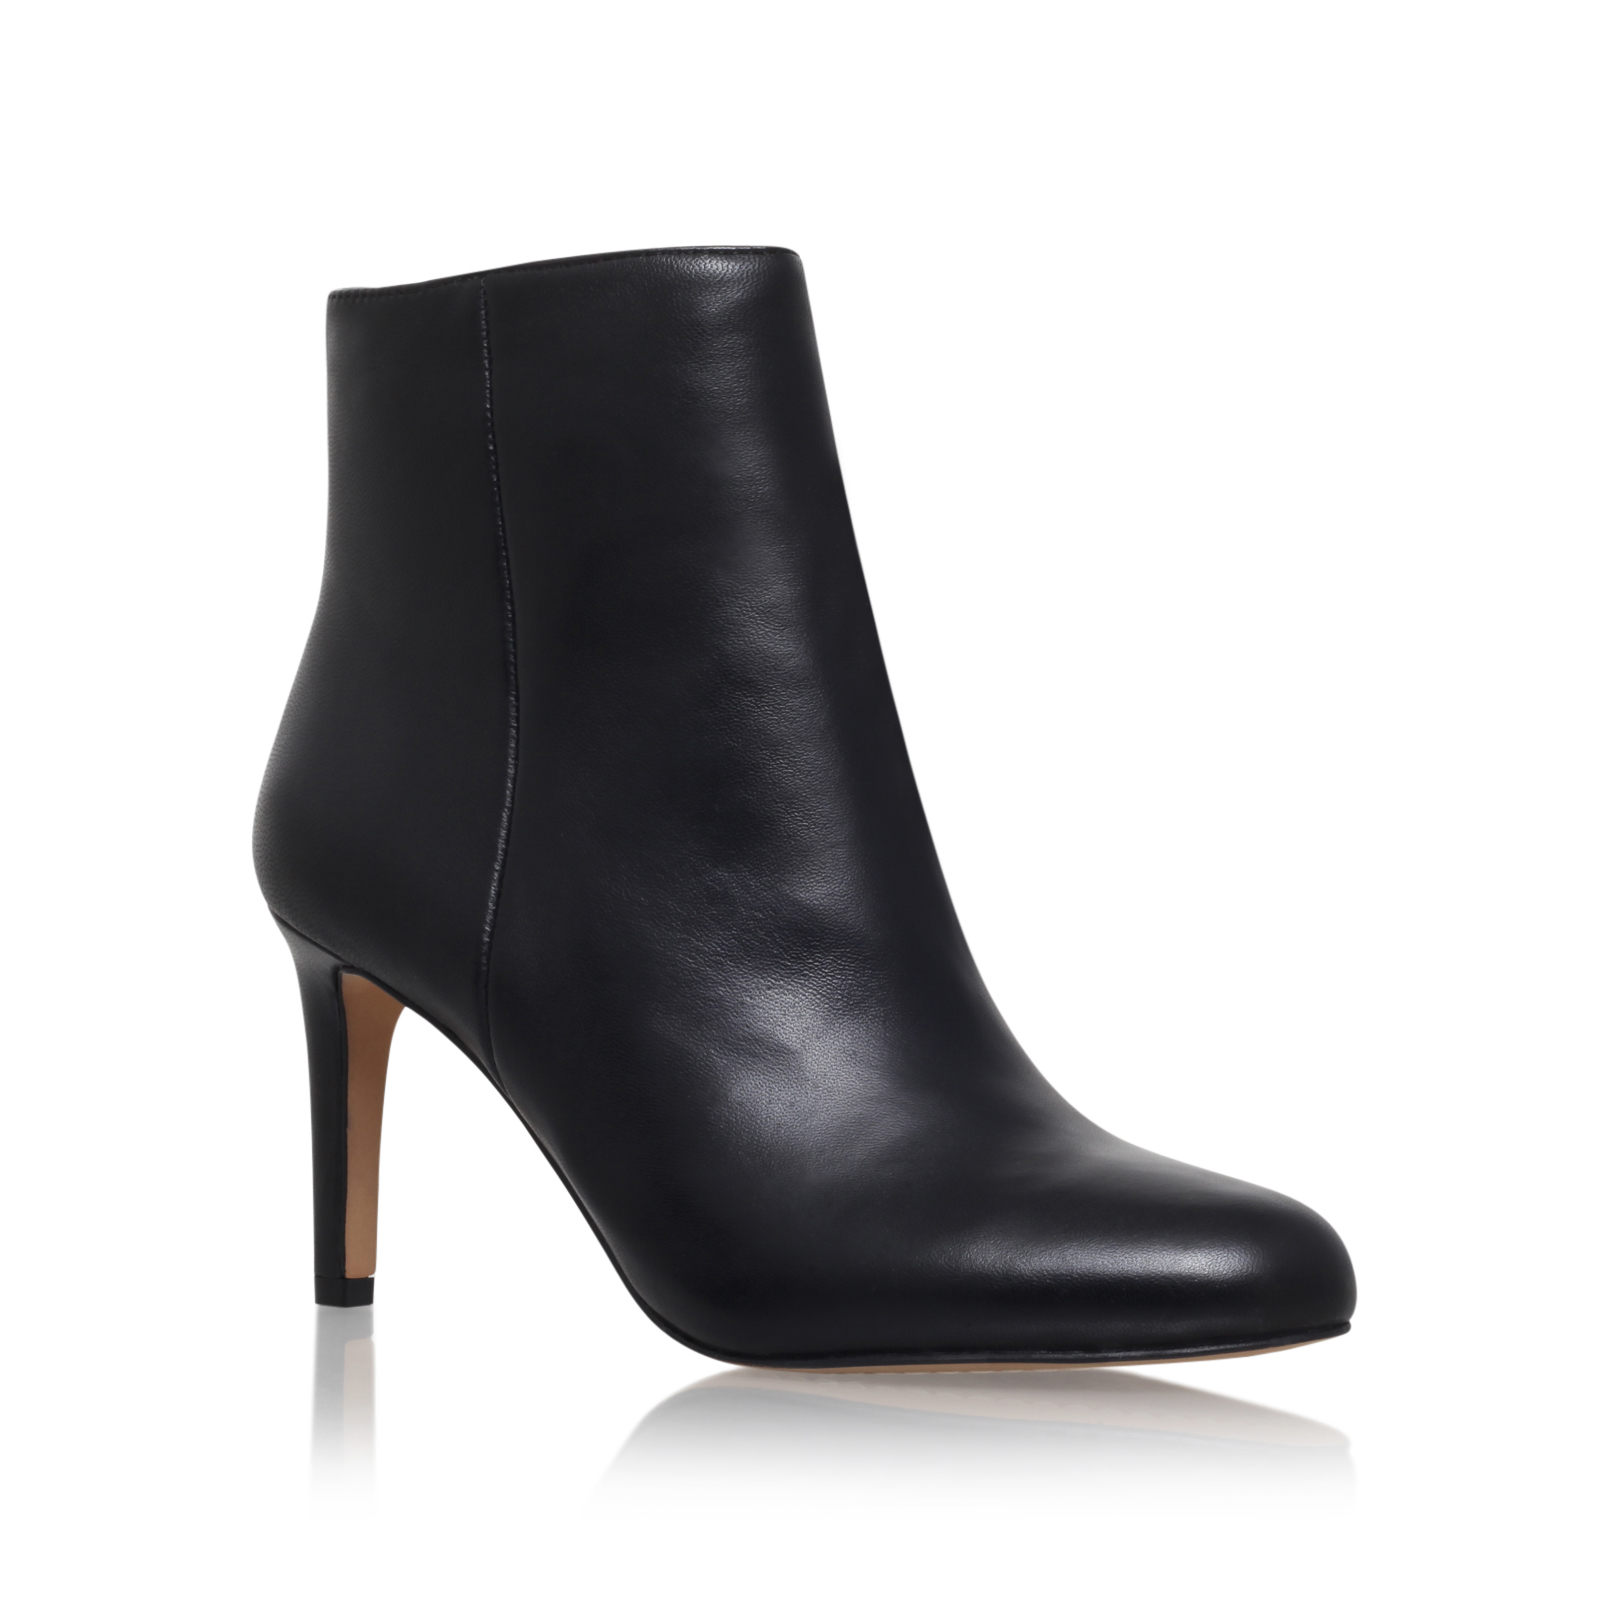 Vince Camuto | CLOEY Black Mid Heel Ankle Boots by VINCE CAMUTO